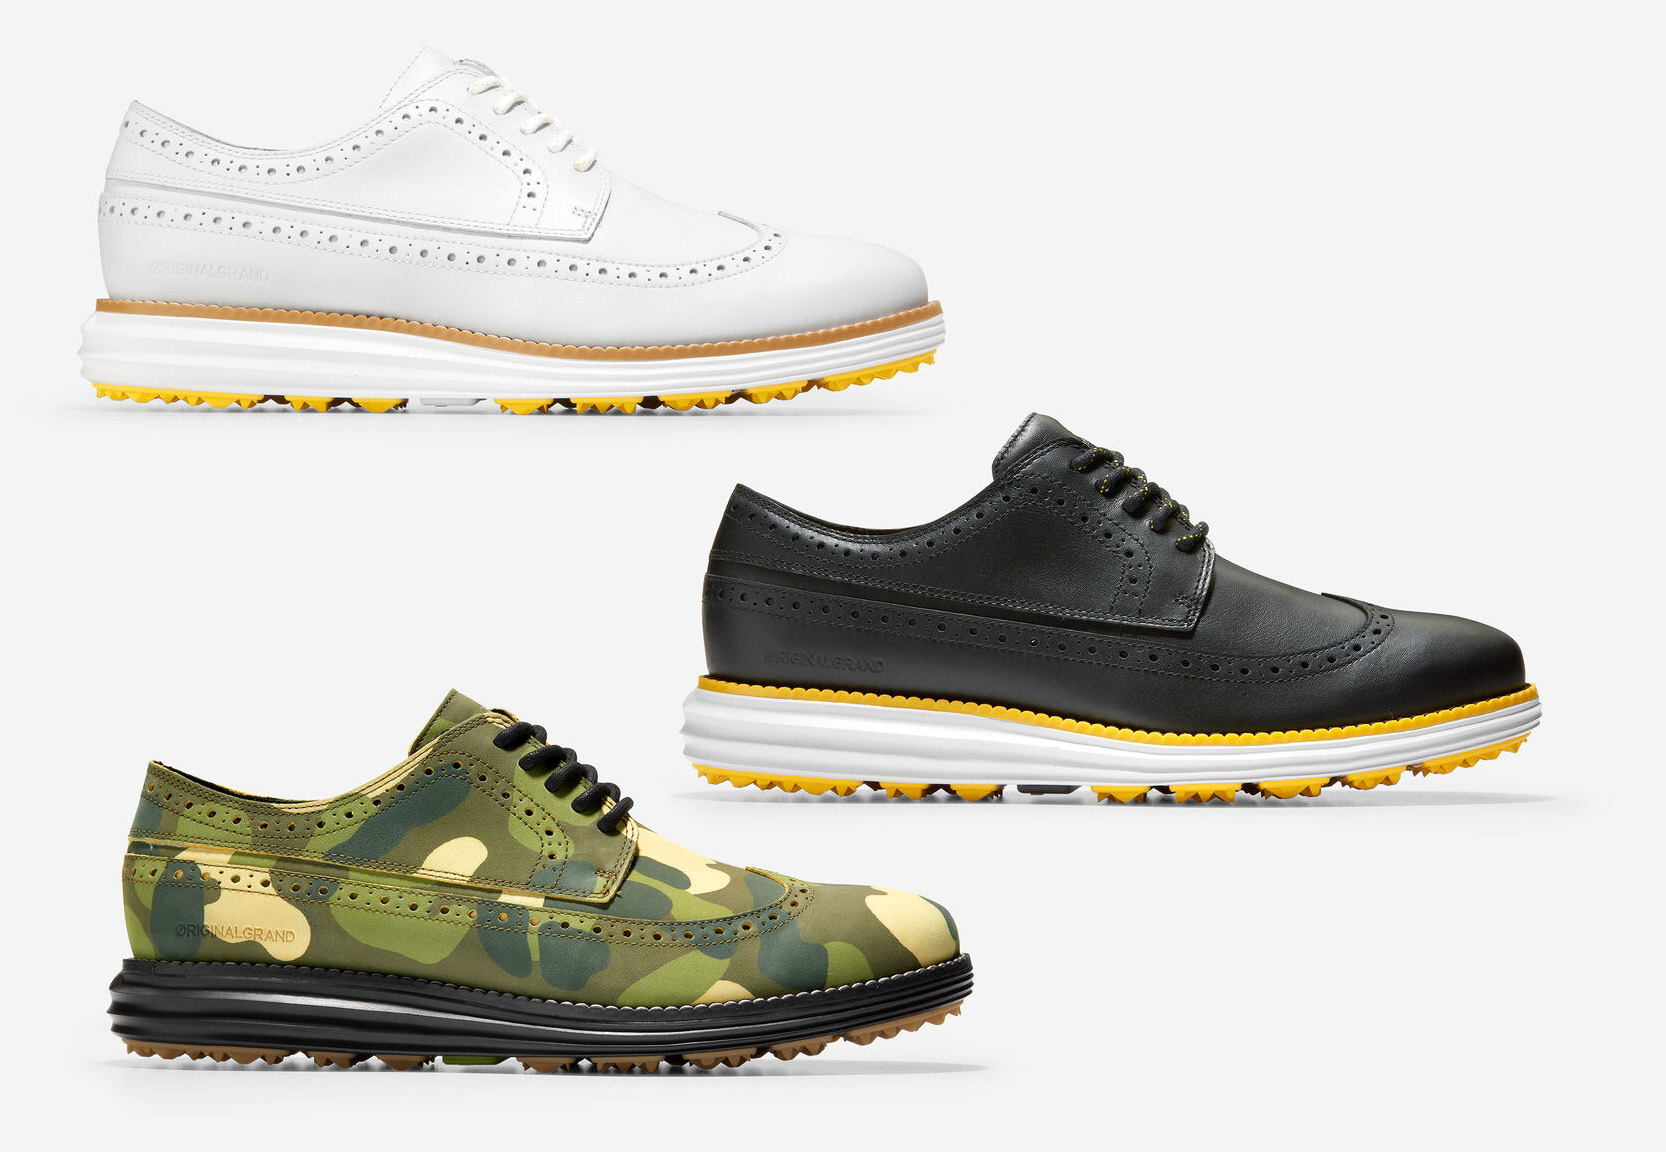 Cole Haan Golf Shoes